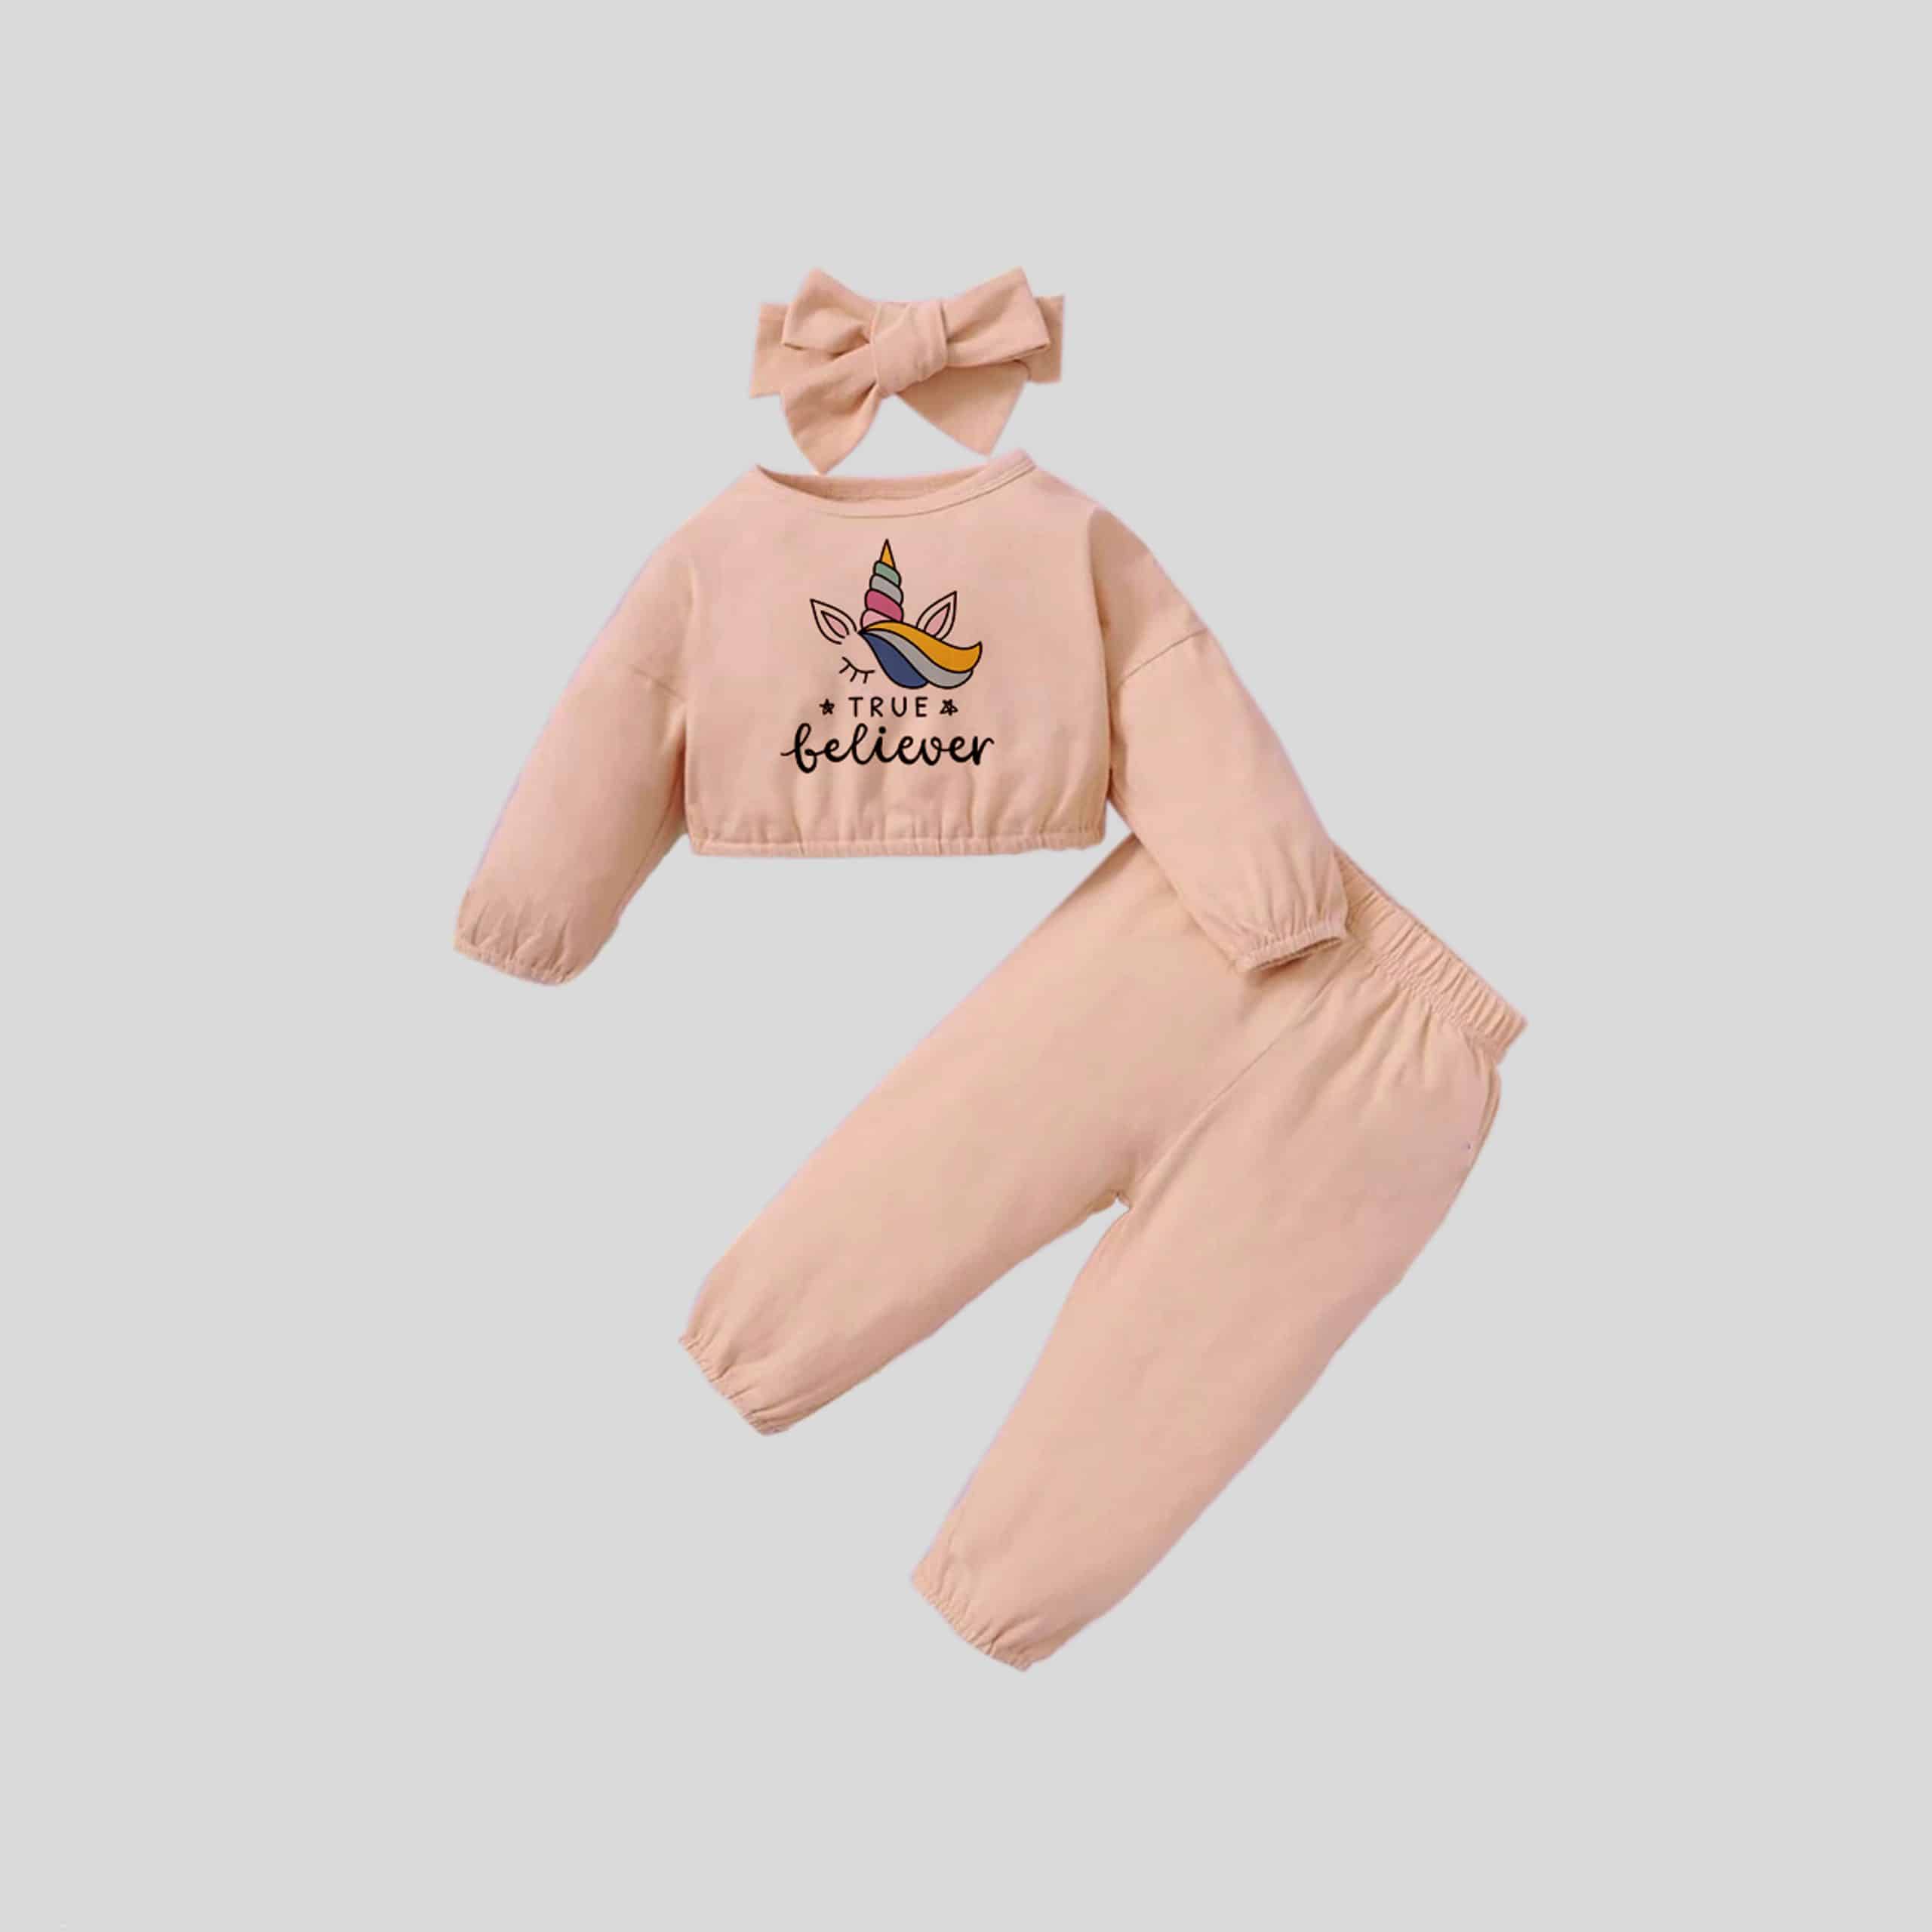 Girls peach Sweatshirt with cute print details and Pants set with matching headband-RKFCW305